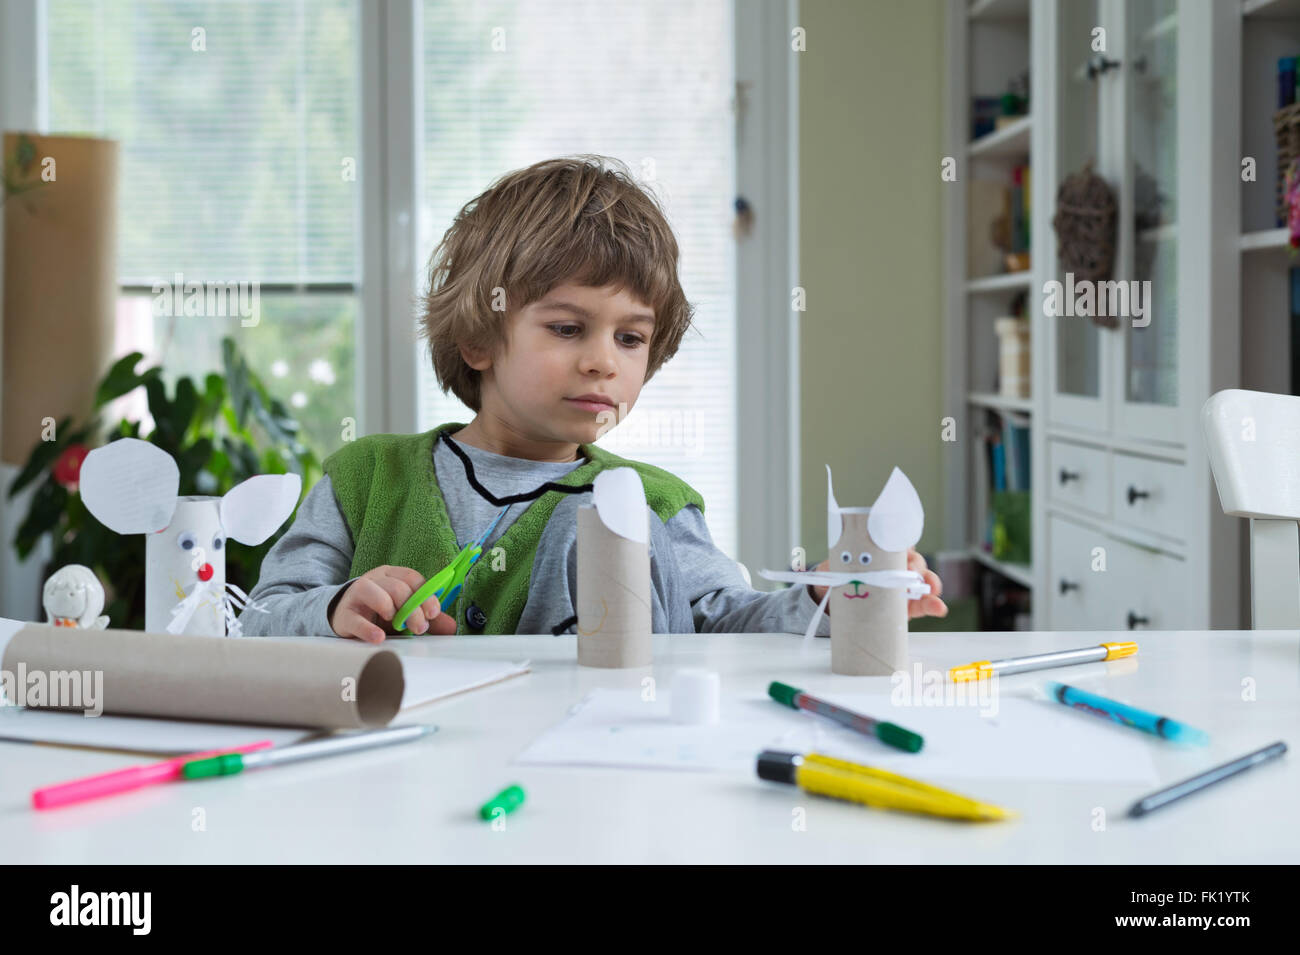 Little boy being creative making homemade paper toys. Supporting creativity, learning by doing, learning through experience. Stock Photo